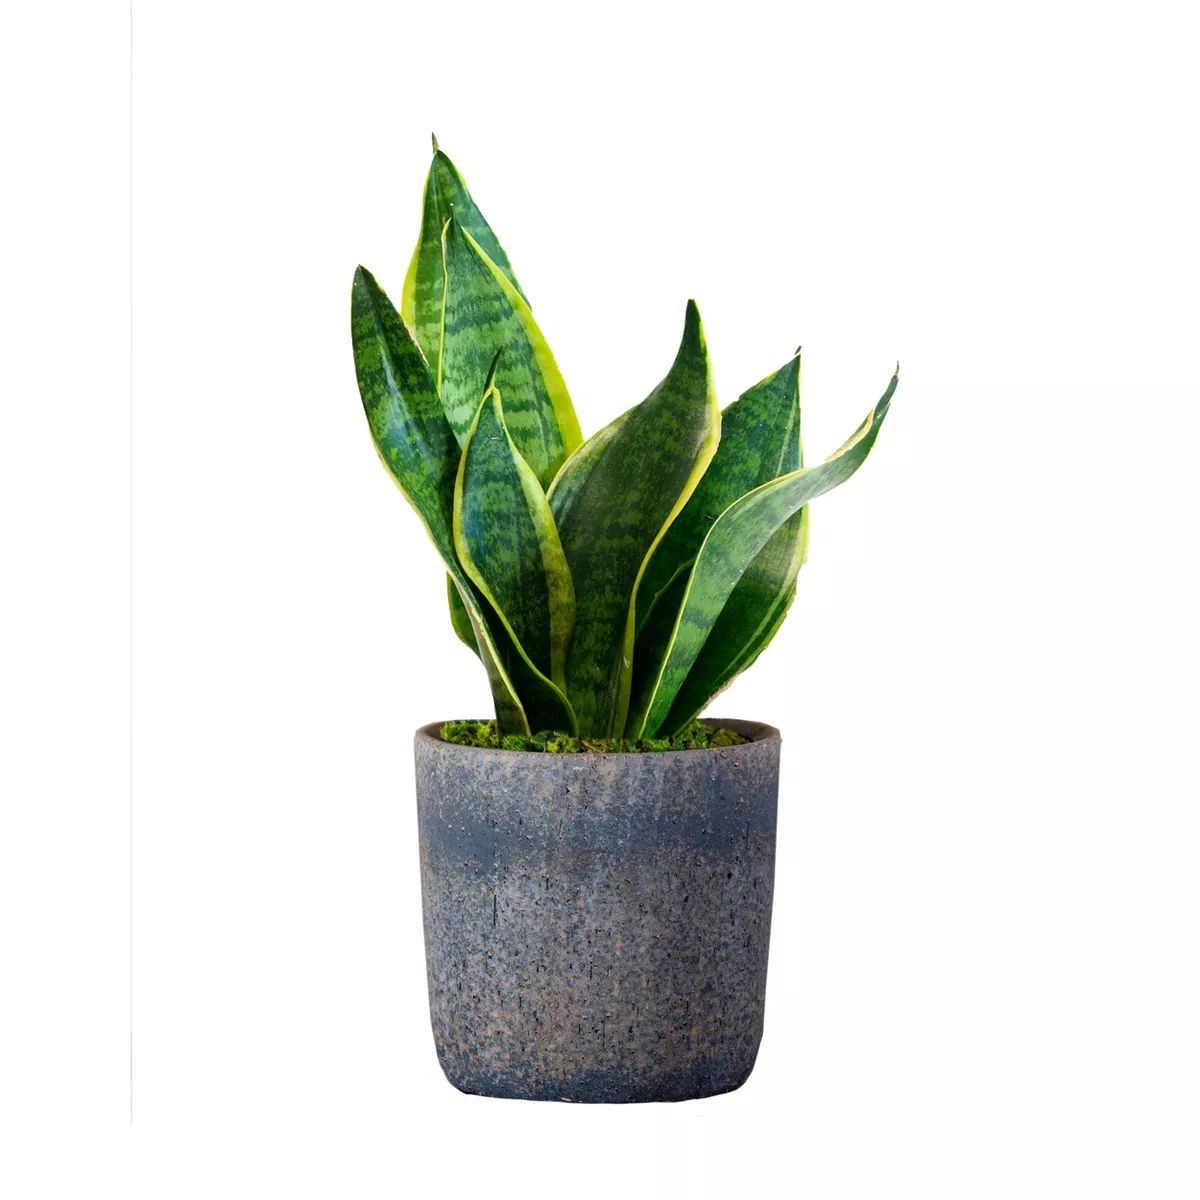 Live Sansevieria Snake Plant in Repose Rustic Stone Planter | Target